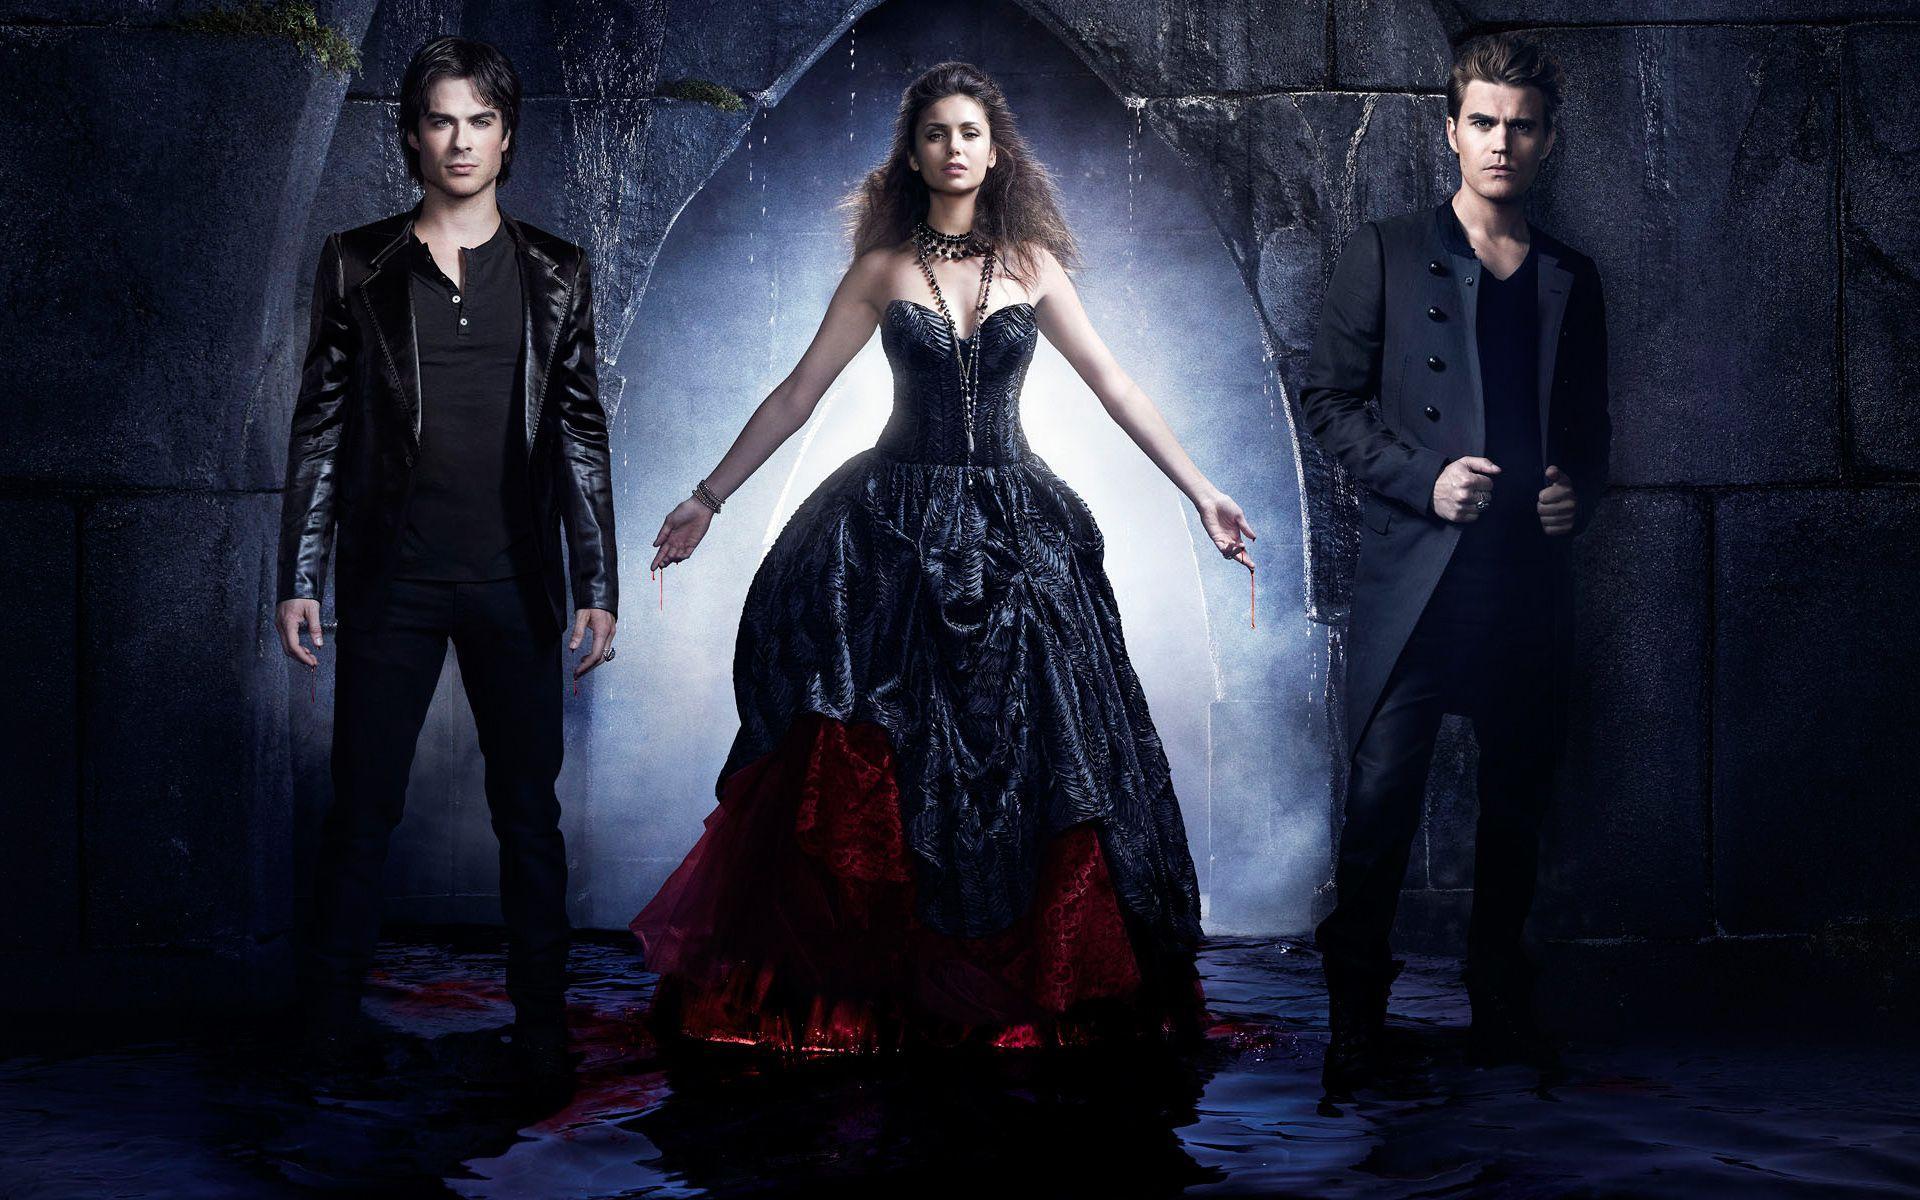 More “The Vampire Diaries” and “The Originals”. M&K SERIAL BLOGGERS